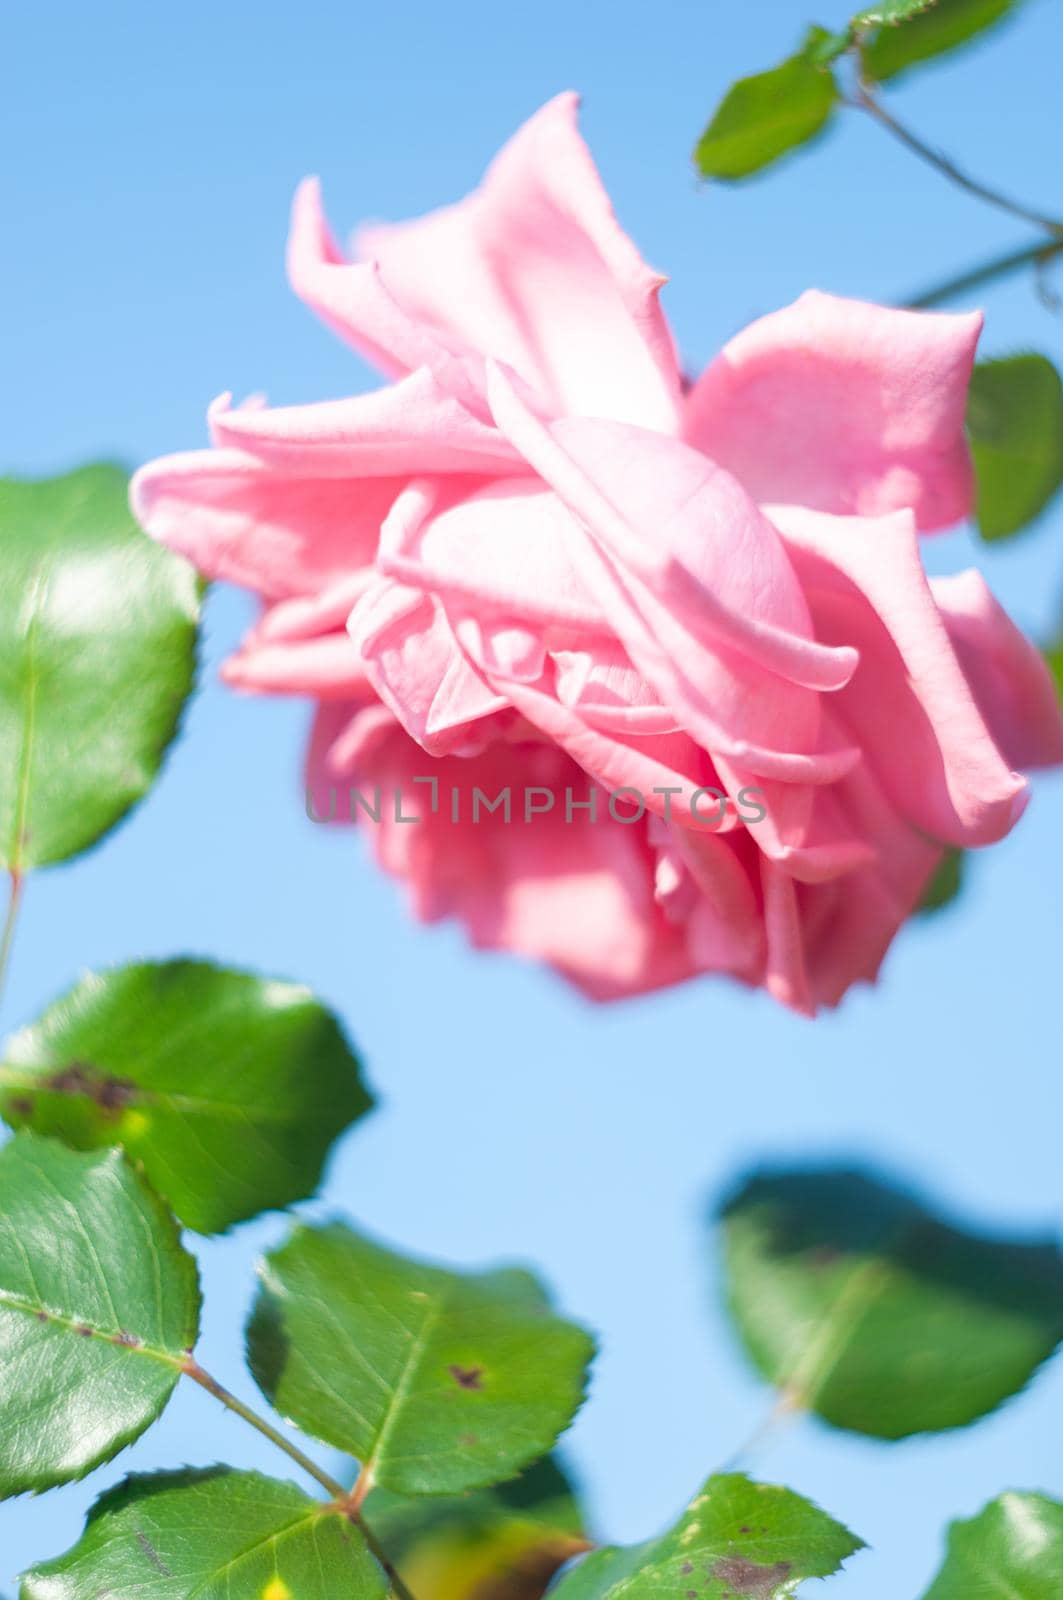 profusely blooming pink rose bush near the fence, against the house, by KaterinaDalemans